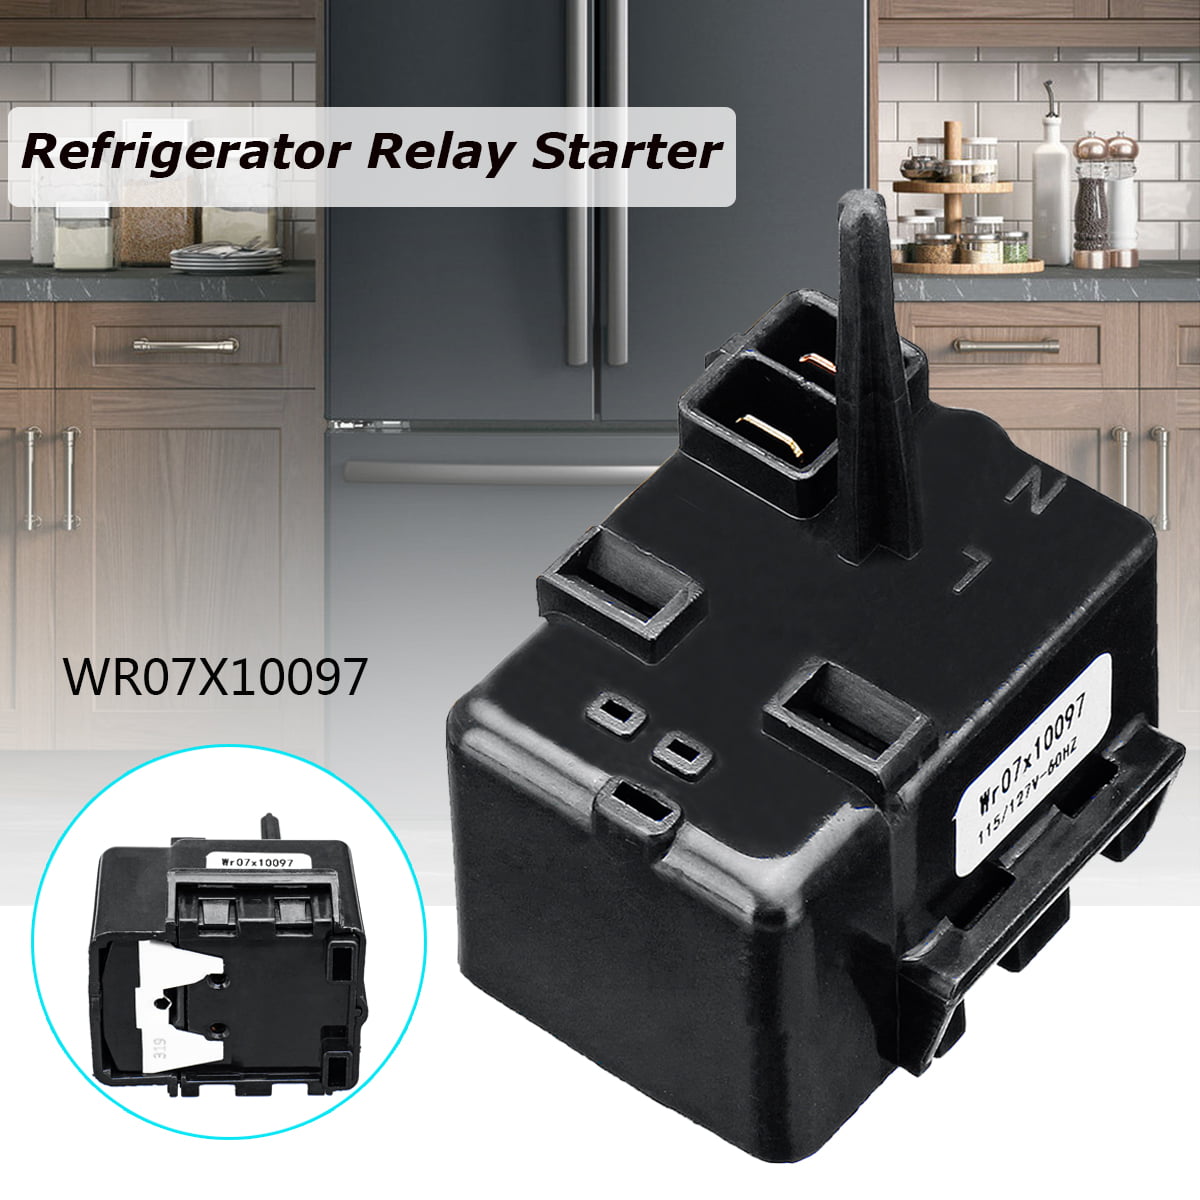 CPT-097 Whirlpool 2262185 Start Relay for Refrigerator Clearance Sale 5 PCS 